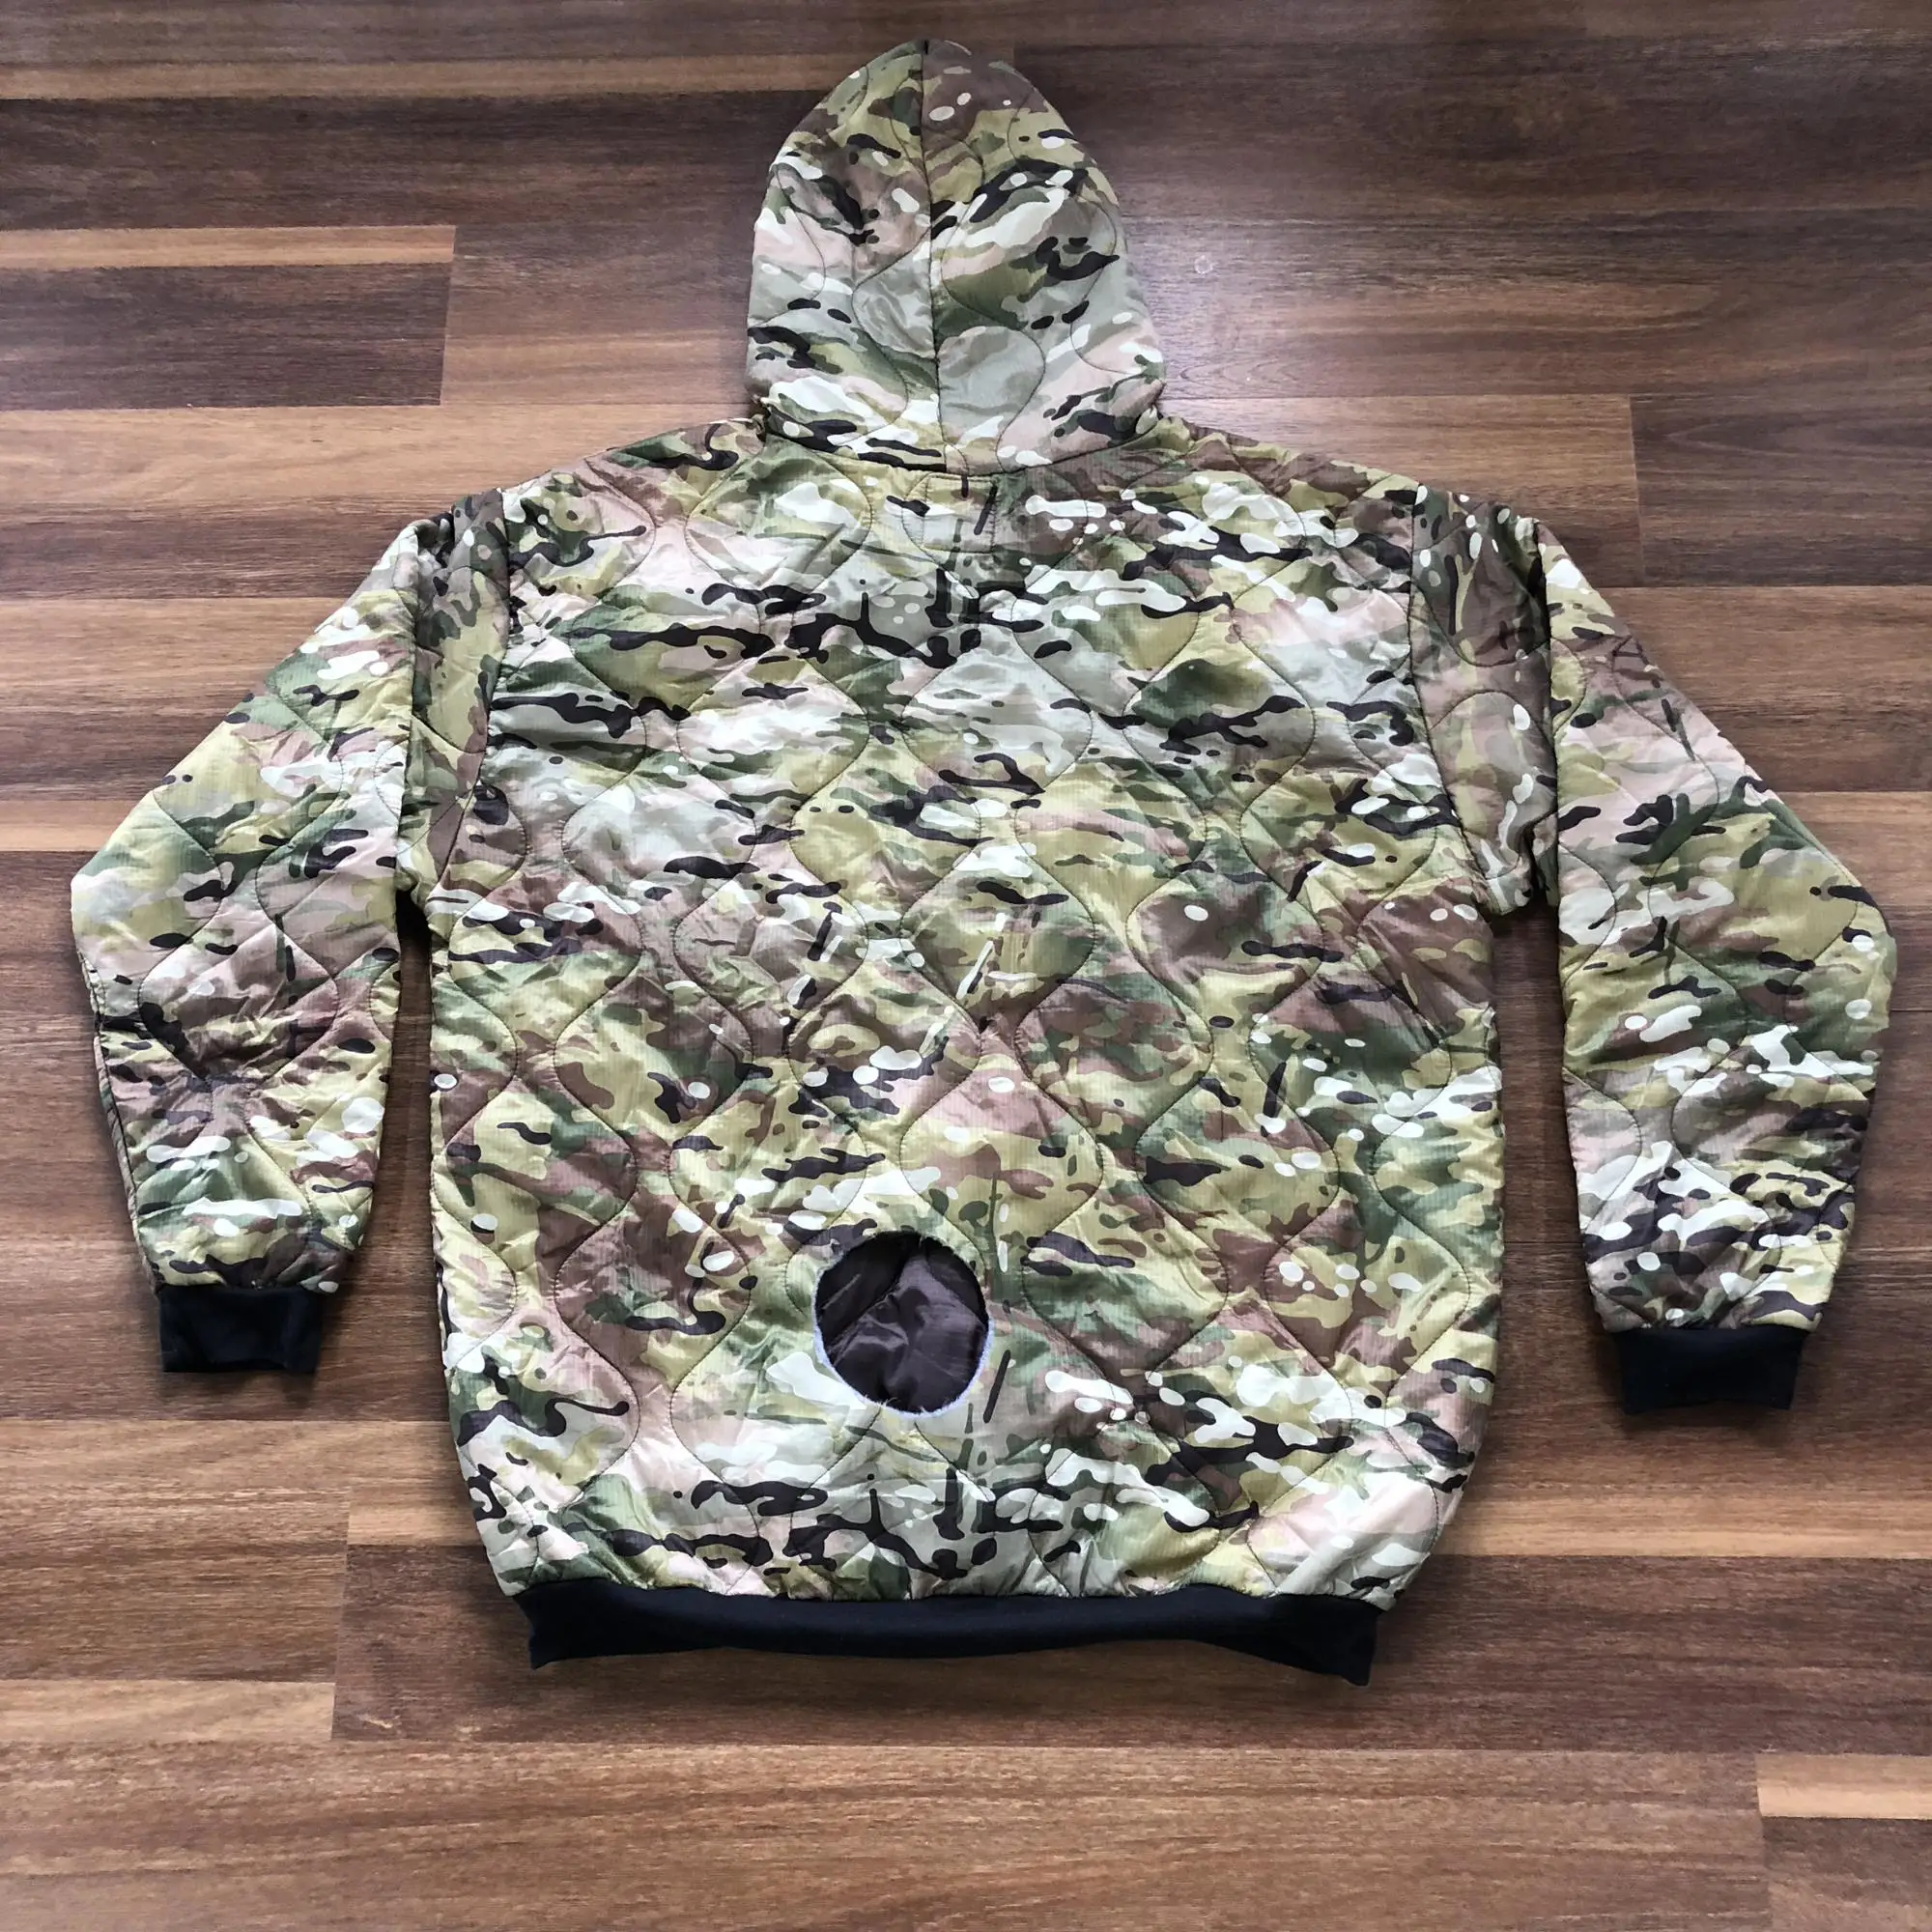 2018 New And Cheap Tactical Hoodie - Buy Tactical Hoodie,Hoodie,Camo ...